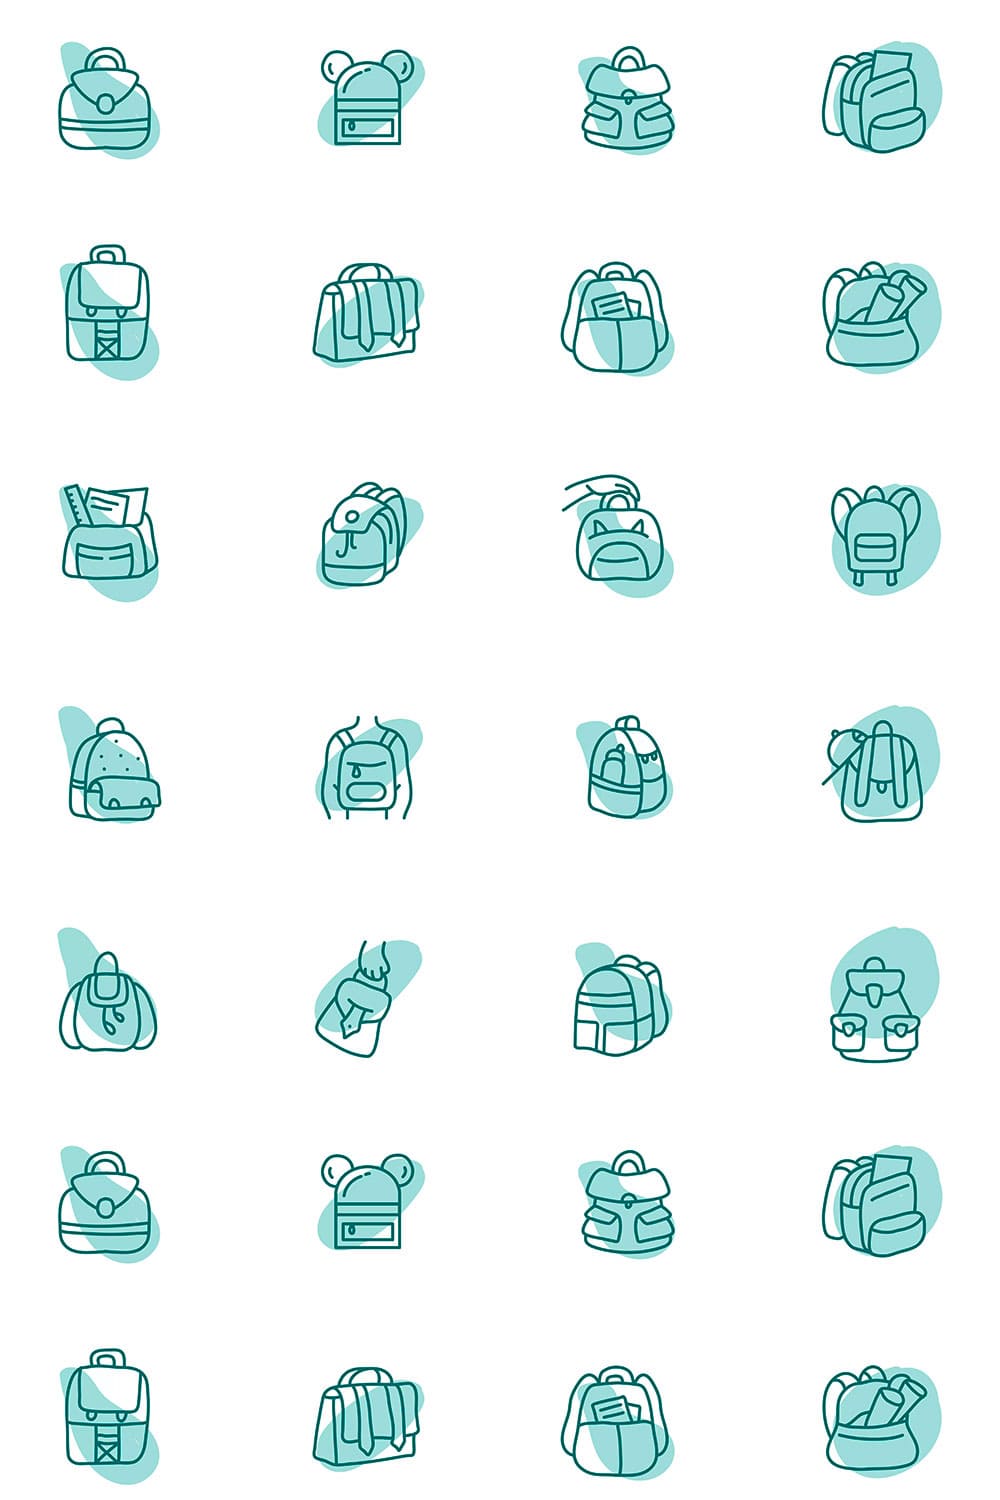 20 minimal backpack icons set, picture for pinterest.